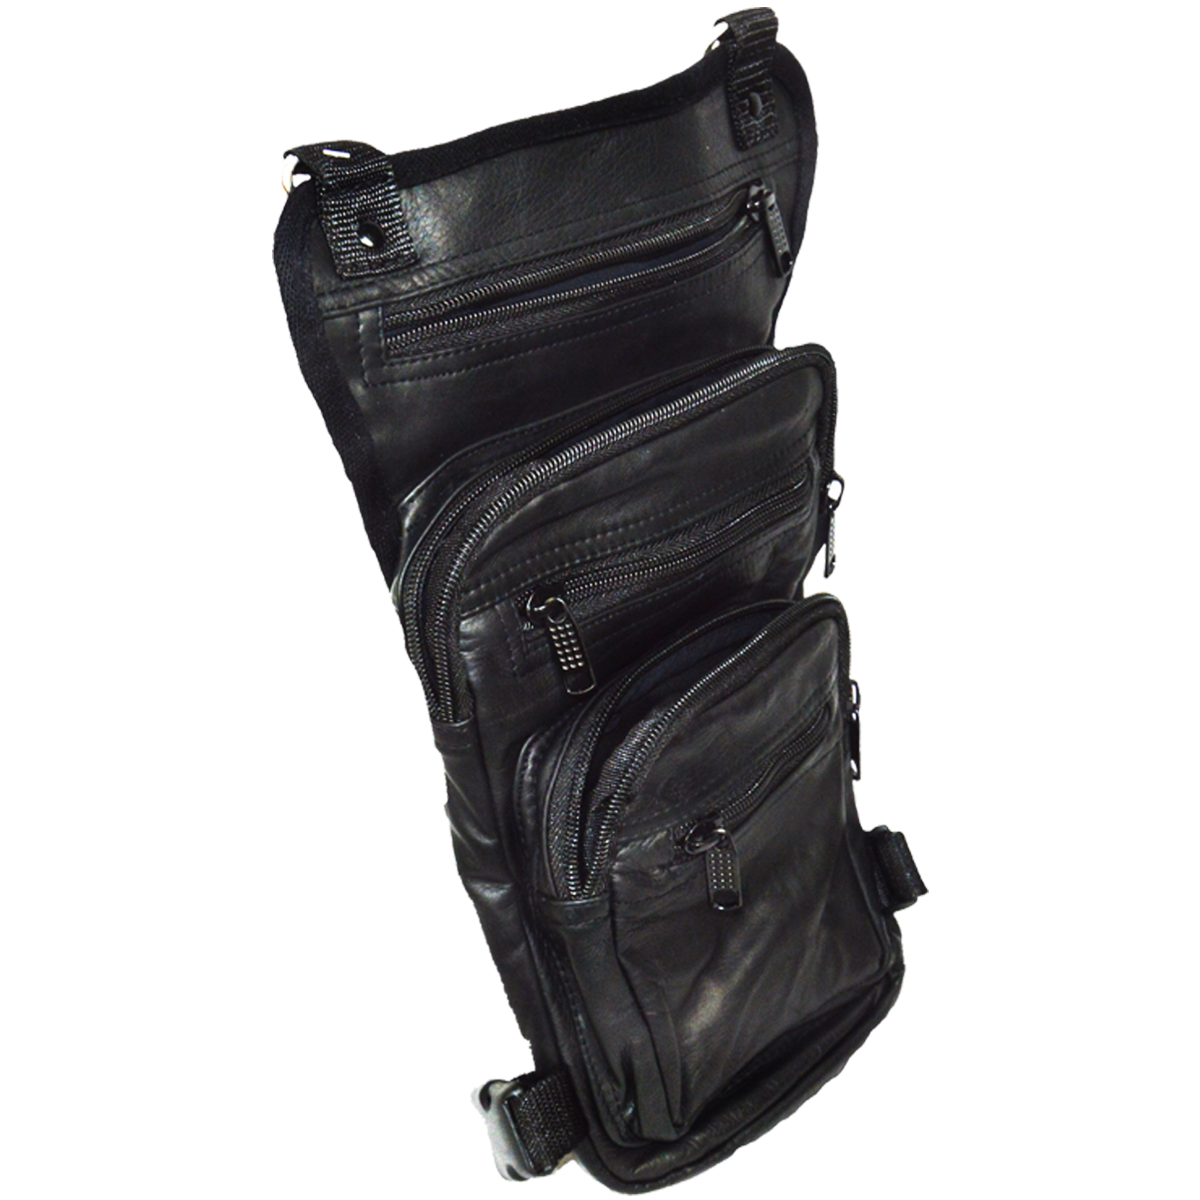 VA562 Black Carry Leather Thigh Bag with Waist Belt and concealed Gun Pocket